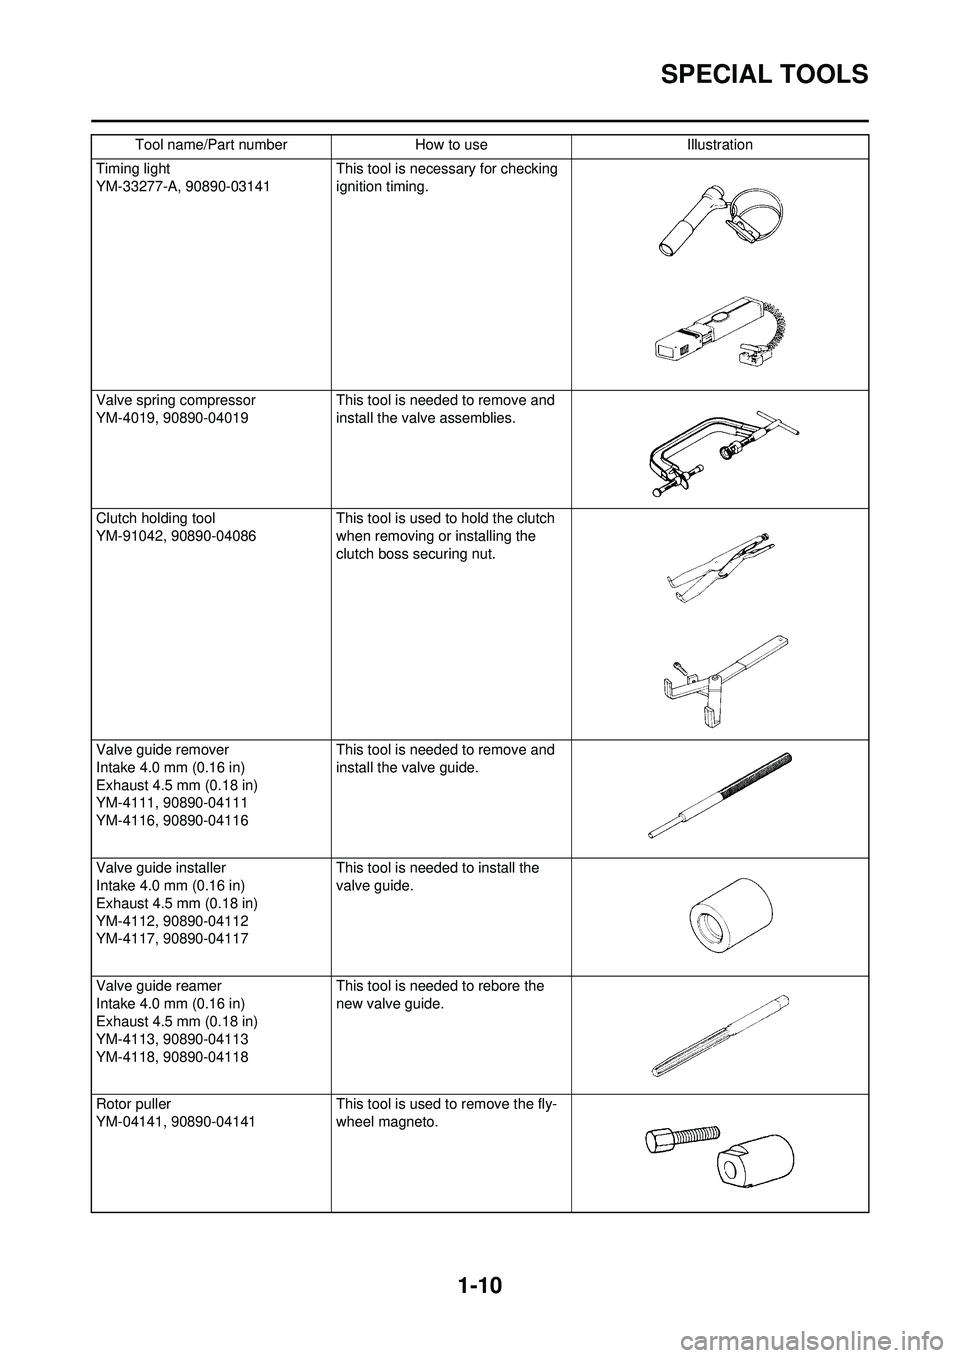 YAMAHA WR 250F 2010  Owners Manual 1-10
SPECIAL TOOLS
Timing light
YM-33277-A, 90890-03141 This tool is necessary for checking 
ignition timing.
Valve spring compressor
YM-4019, 90890-04019  This tool is needed to remove and 
install t